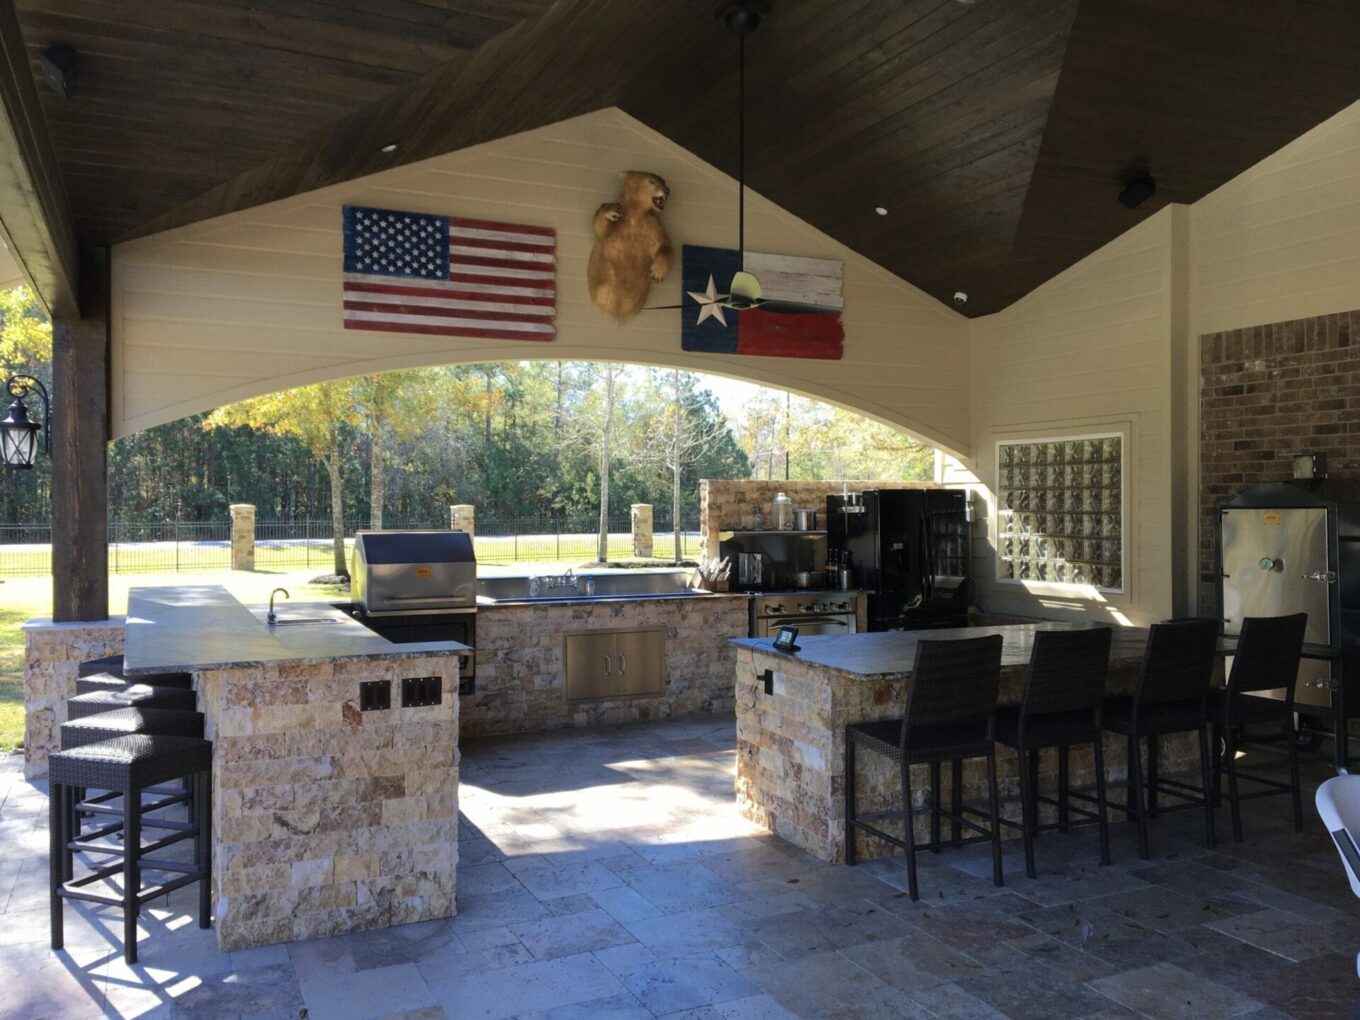 A large outdoor grill area with an american flag hanging from the ceiling.